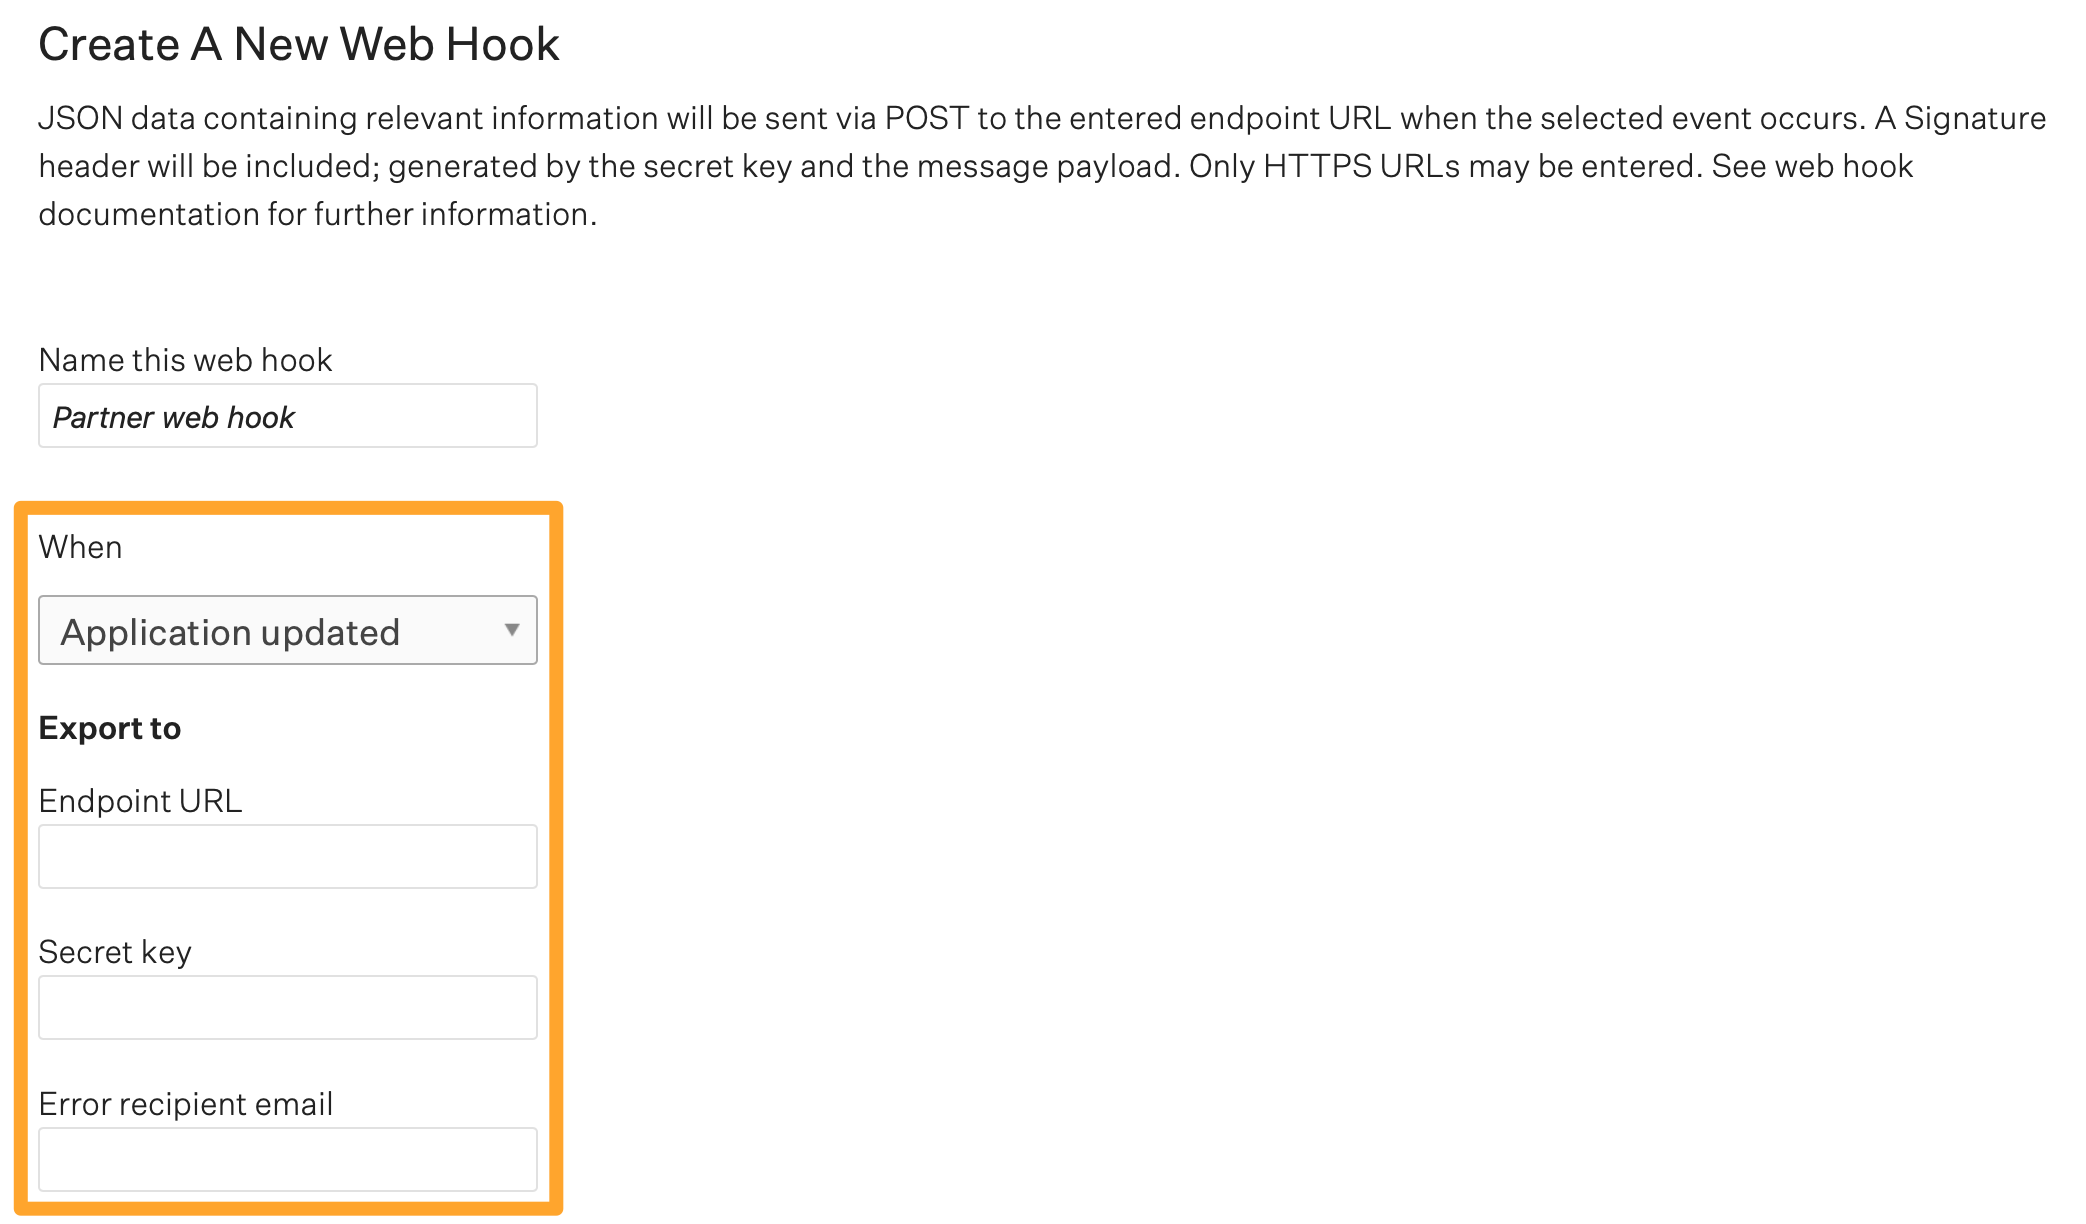 The create a new web hook page shows the configuration options highlighted in a marigold emphasis box